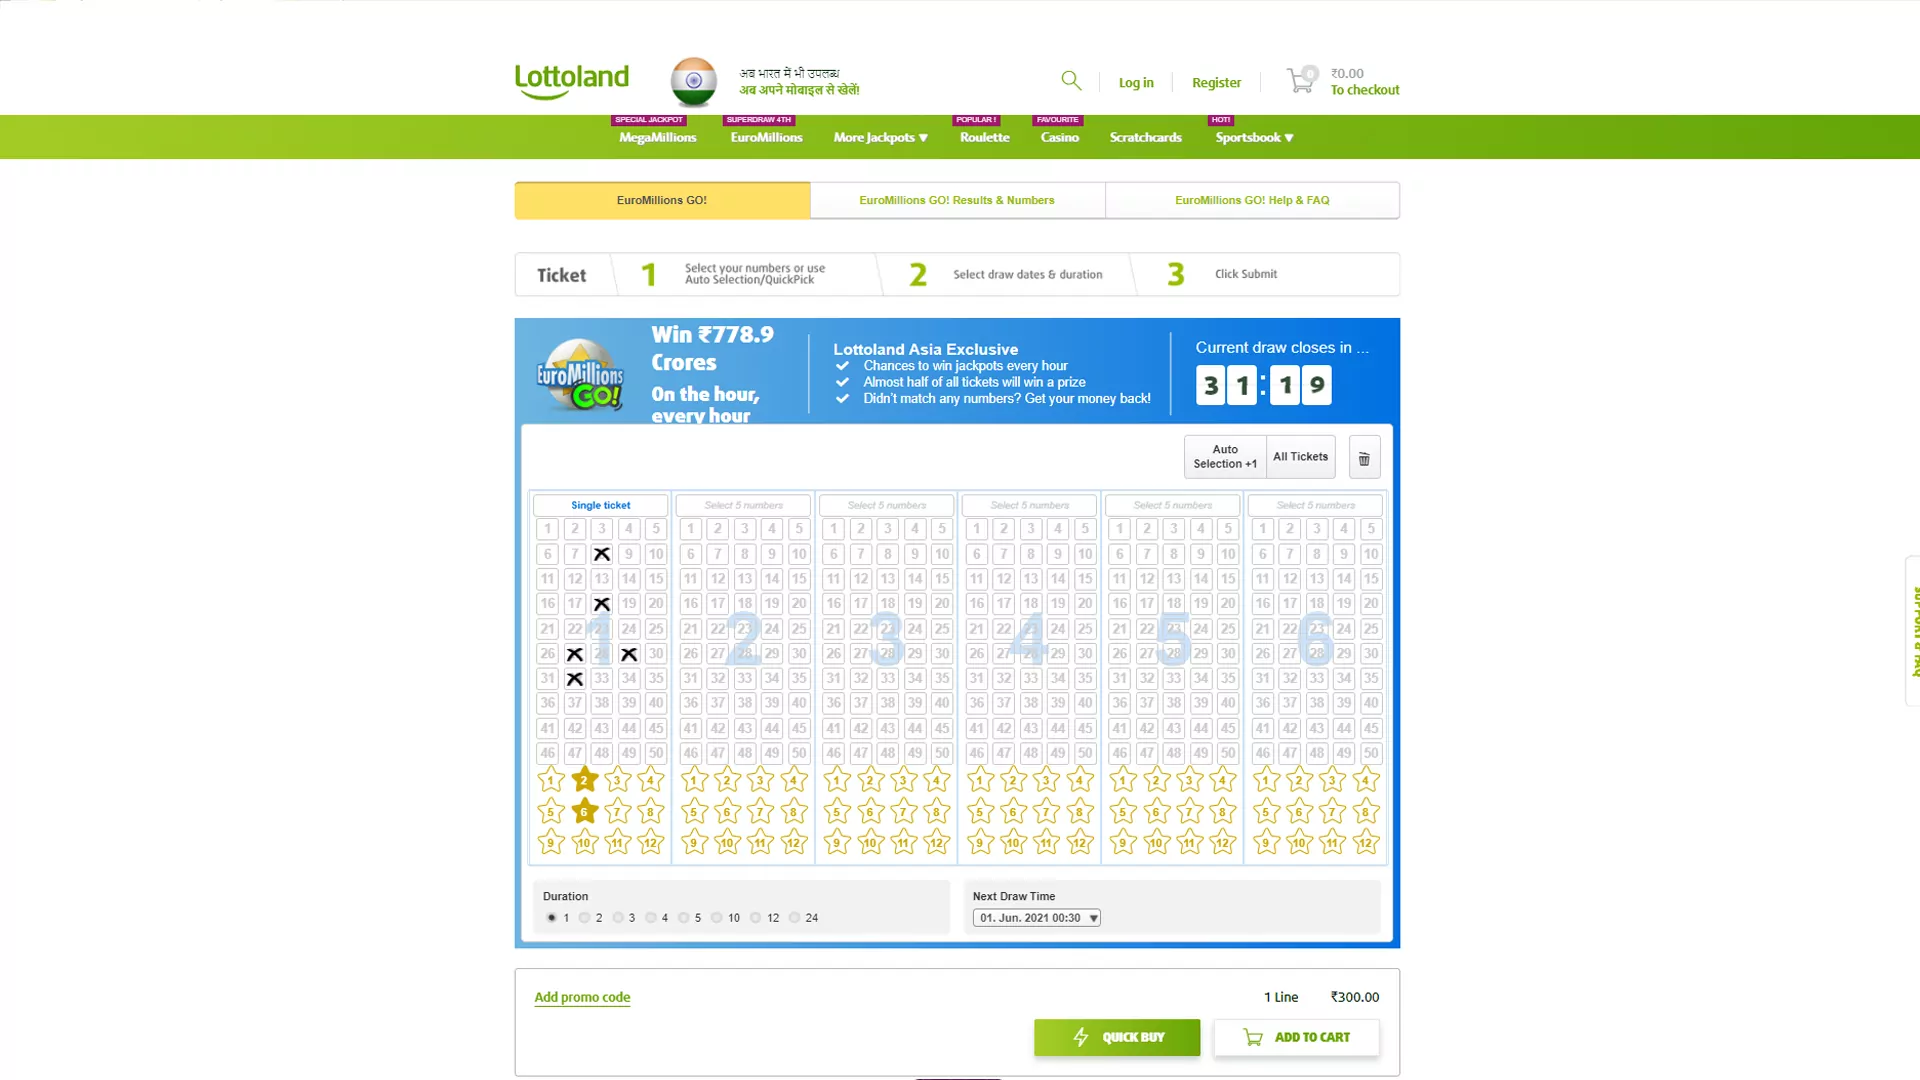 In this Euromillions version, you can try your chances each hour.